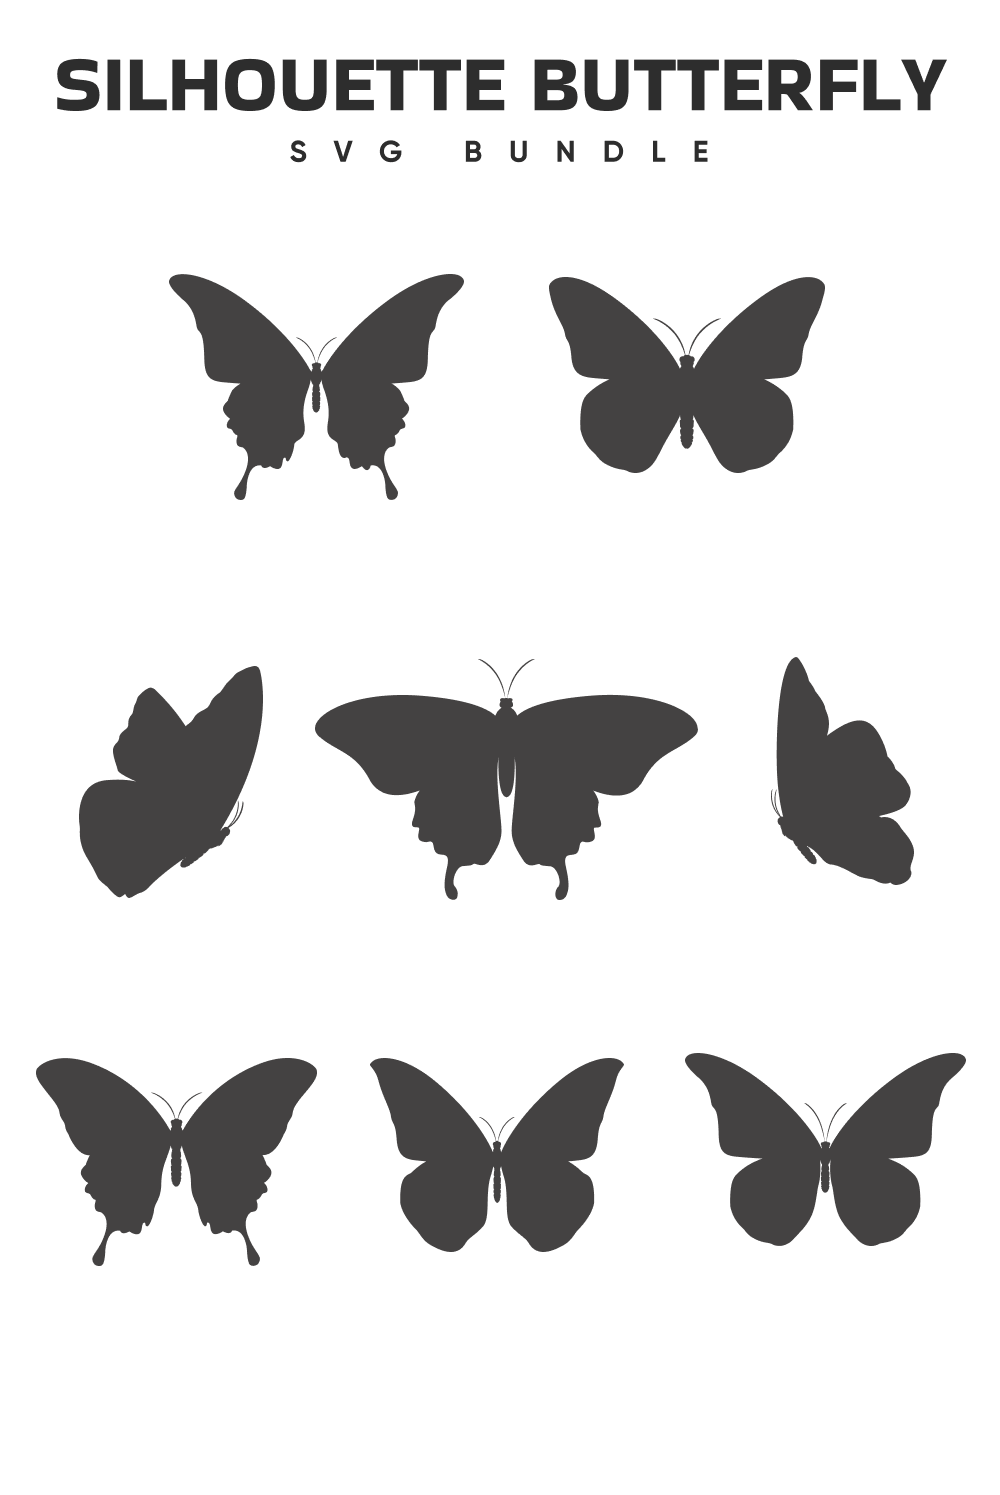 The silhouettes of butterflies are shown in black and white.